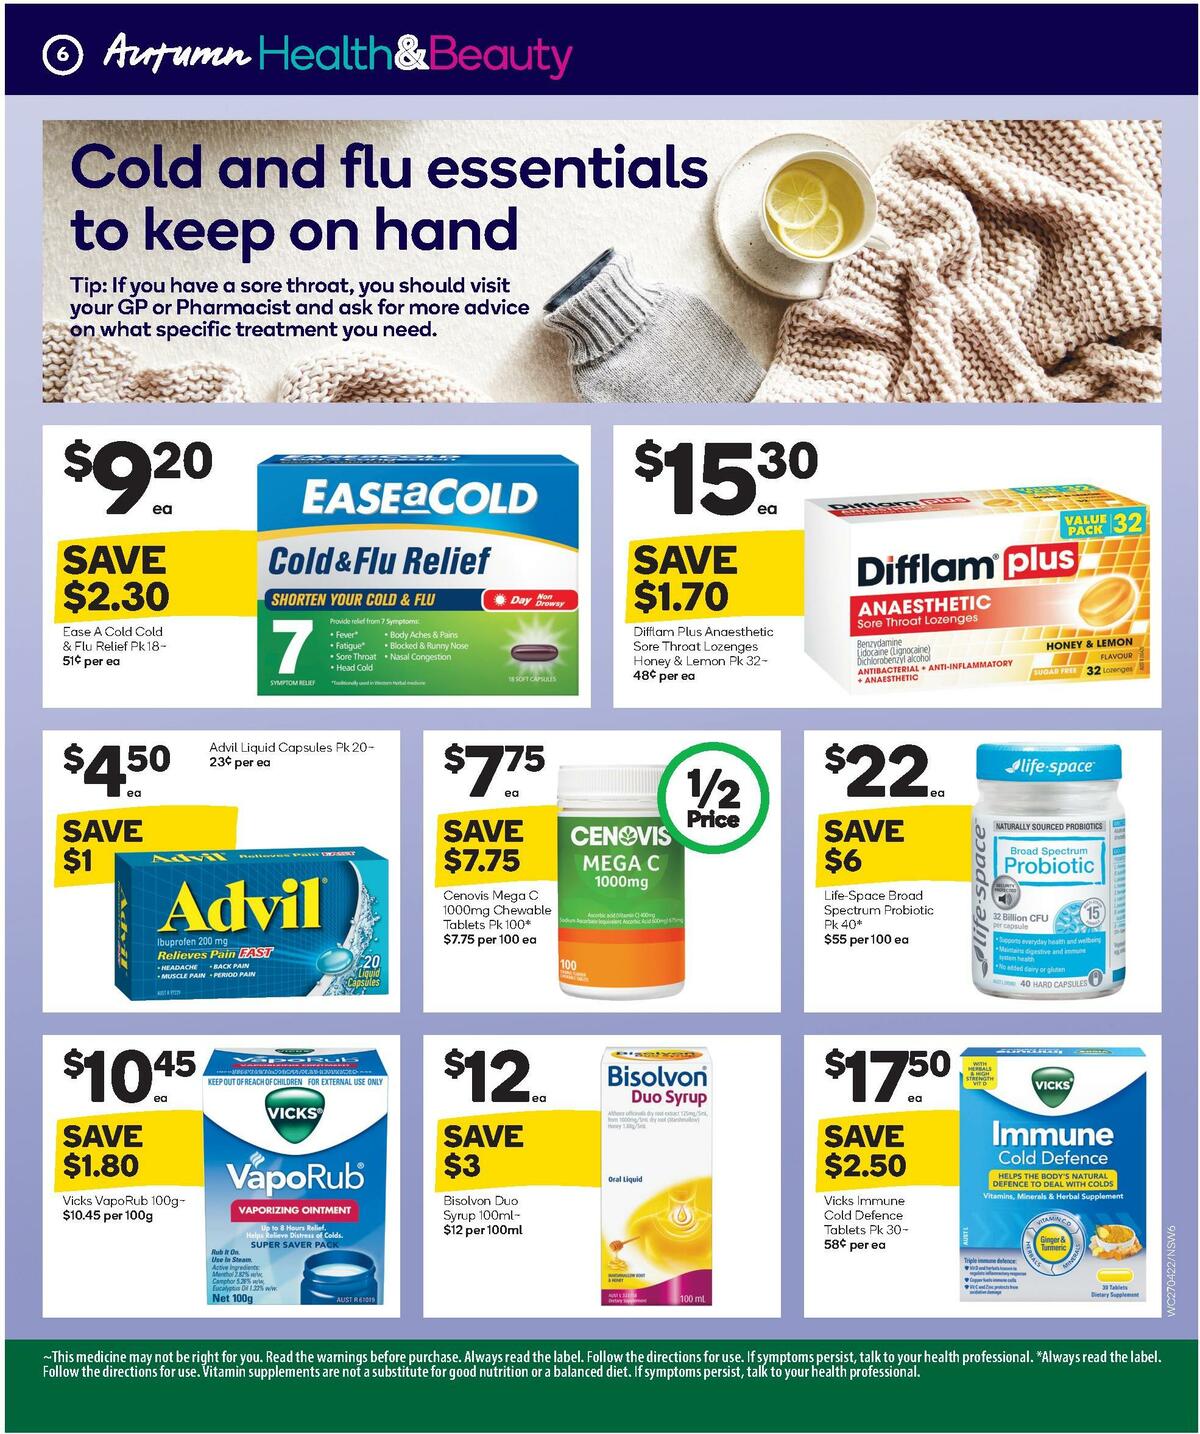 Woolworths Health & Beauty Catalogues from 27 April